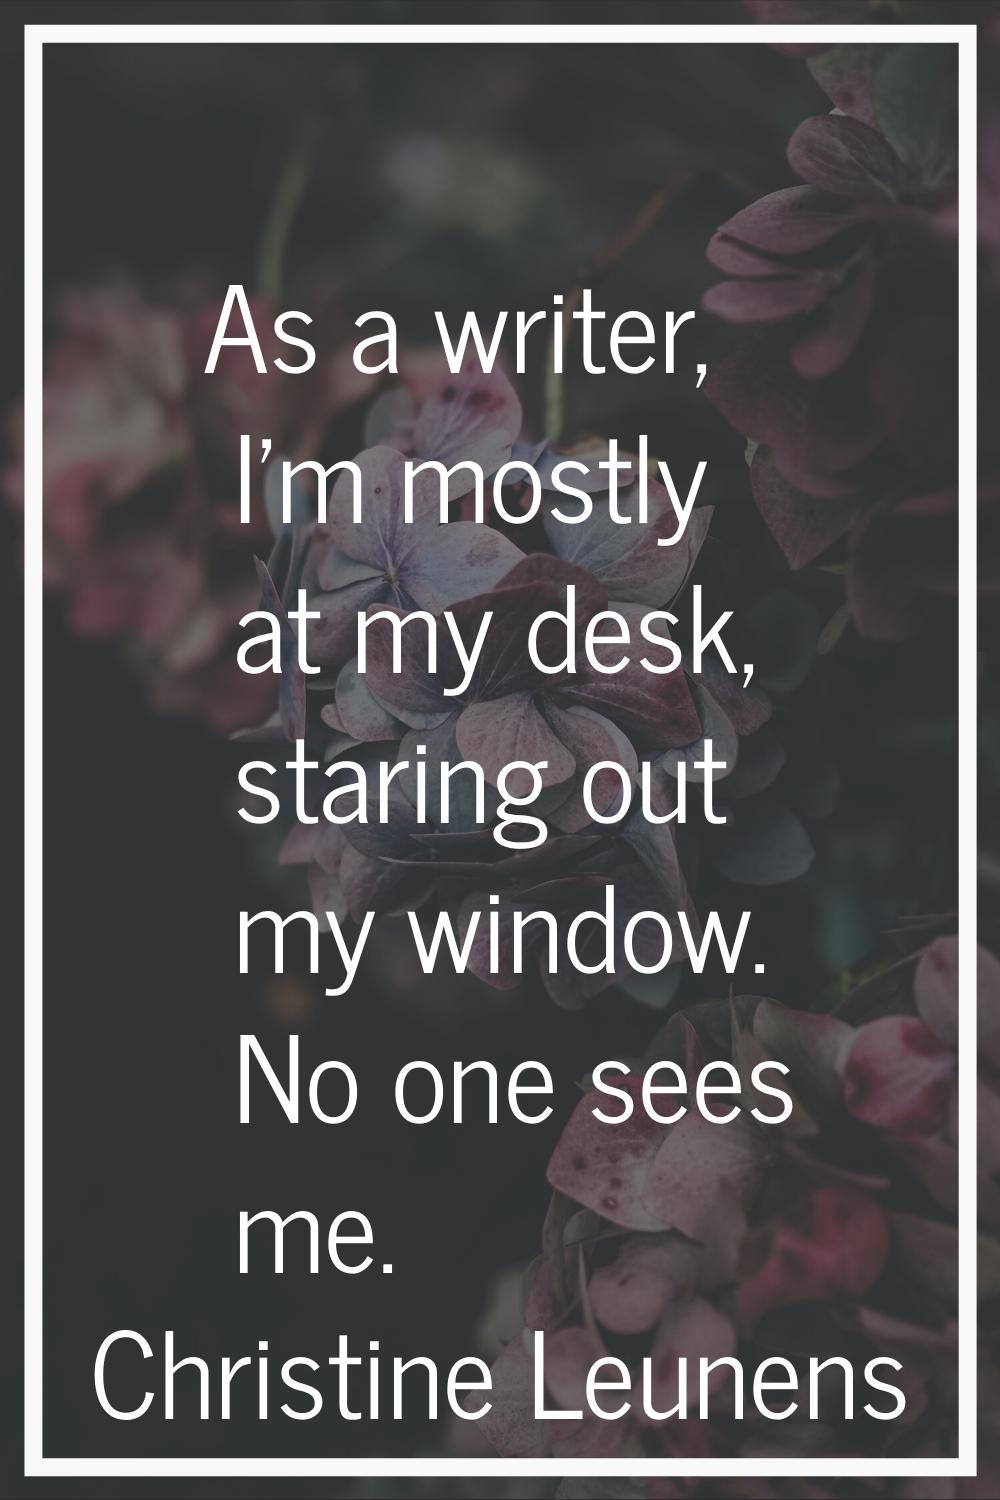 As a writer, I'm mostly at my desk, staring out my window. No one sees me.